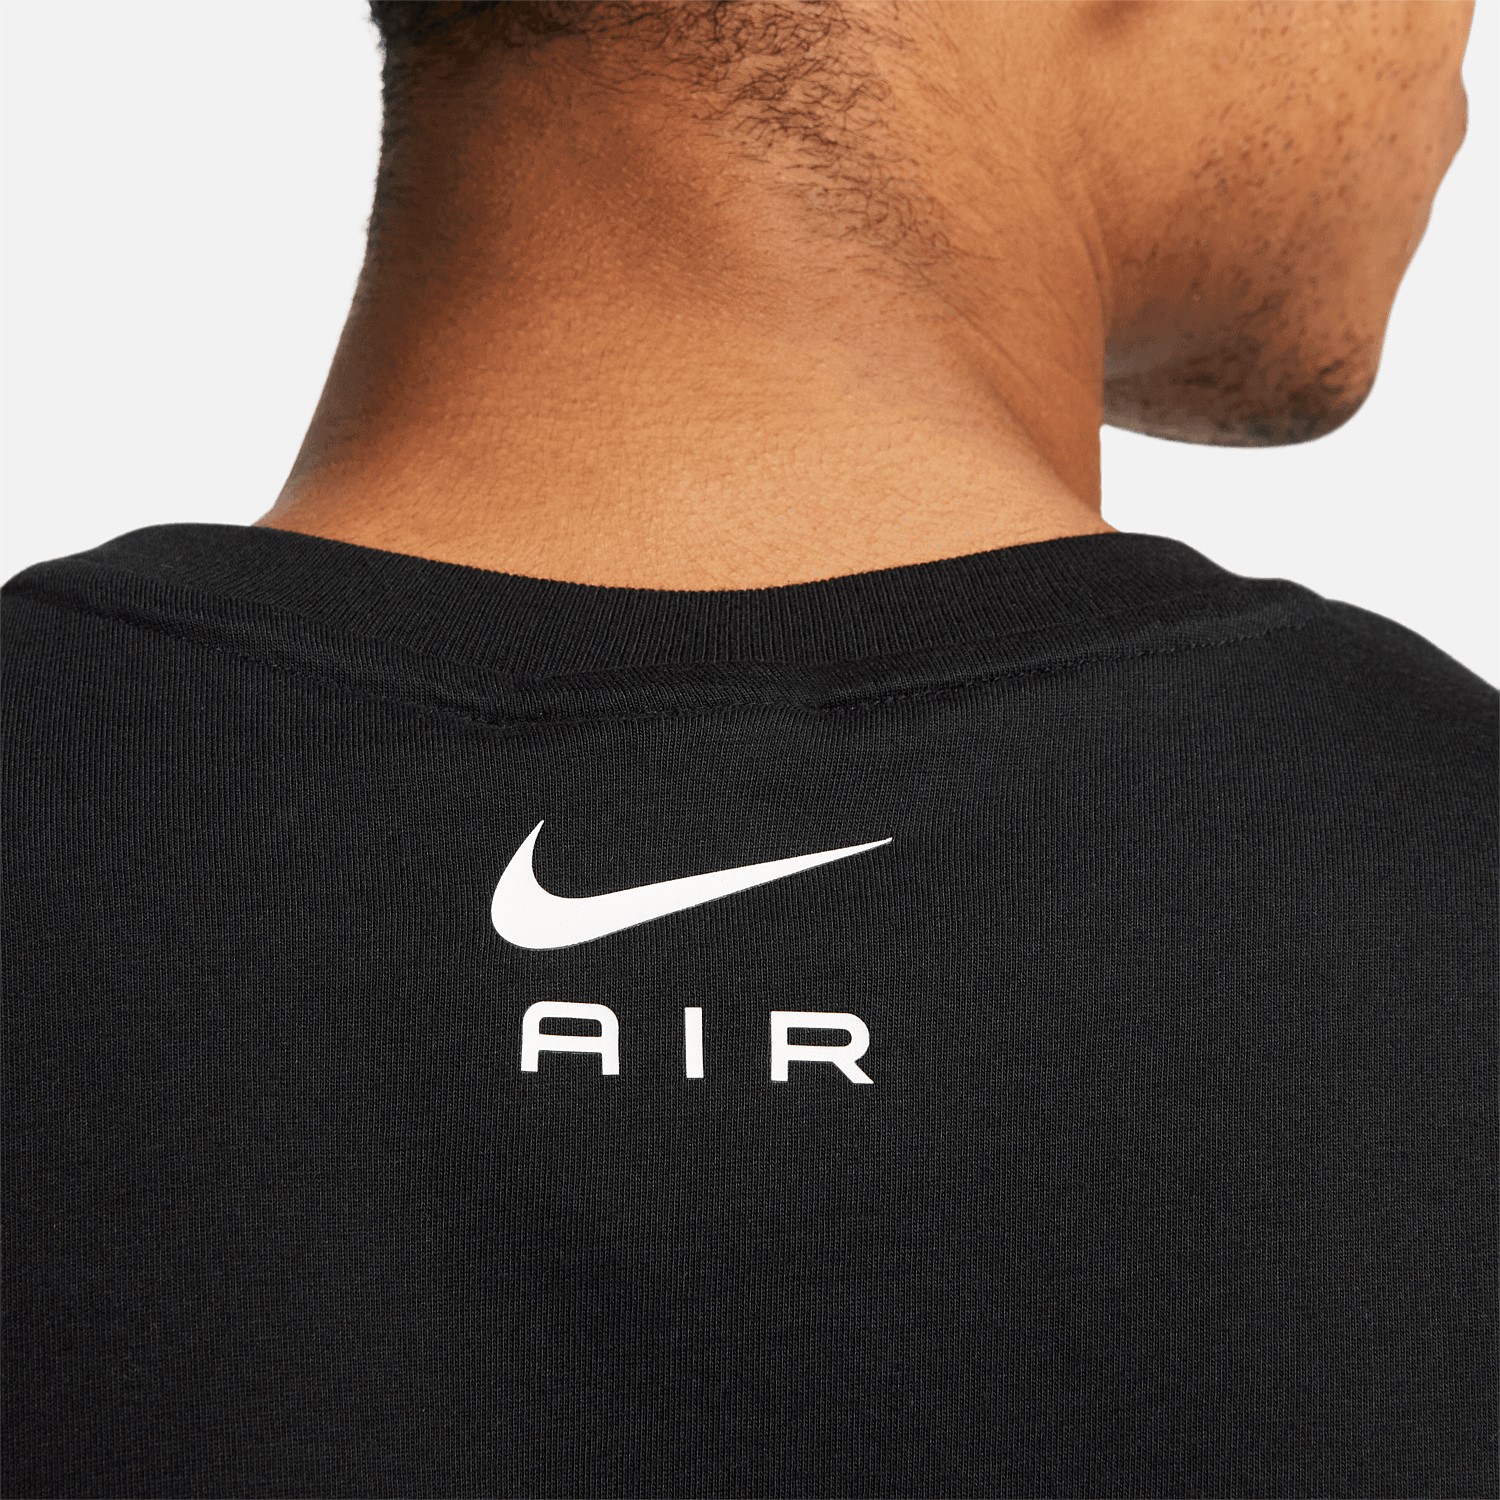 Nike Sportswear Air Graphic Tee | Tees & Singlets | Stirling Sports